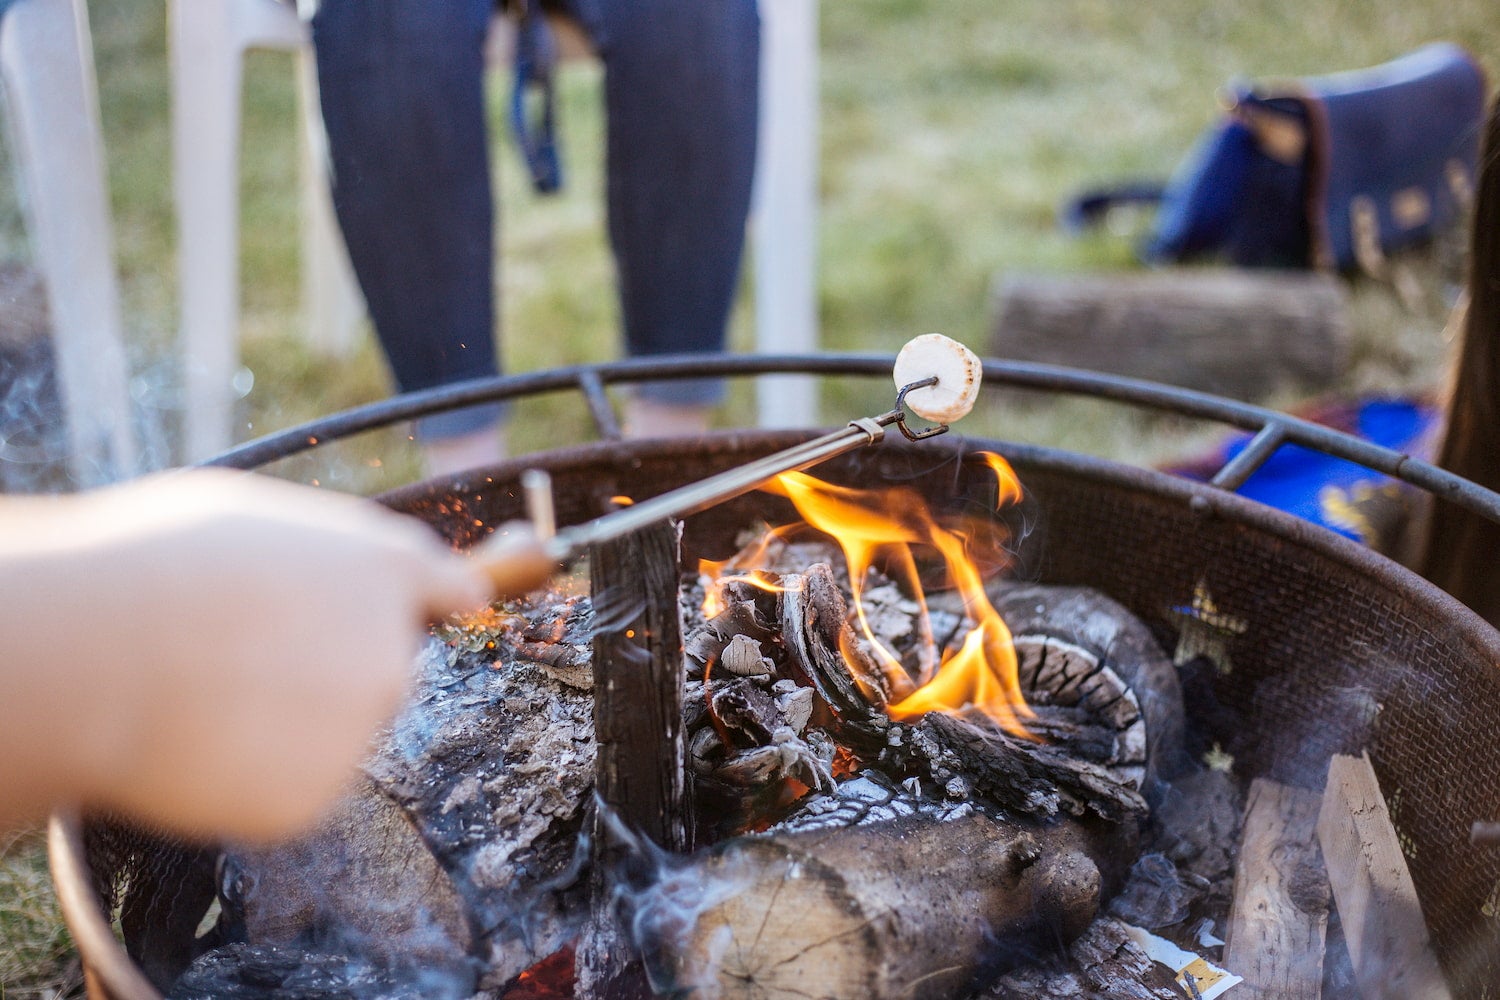 Person roasting marshmallow over a fire.